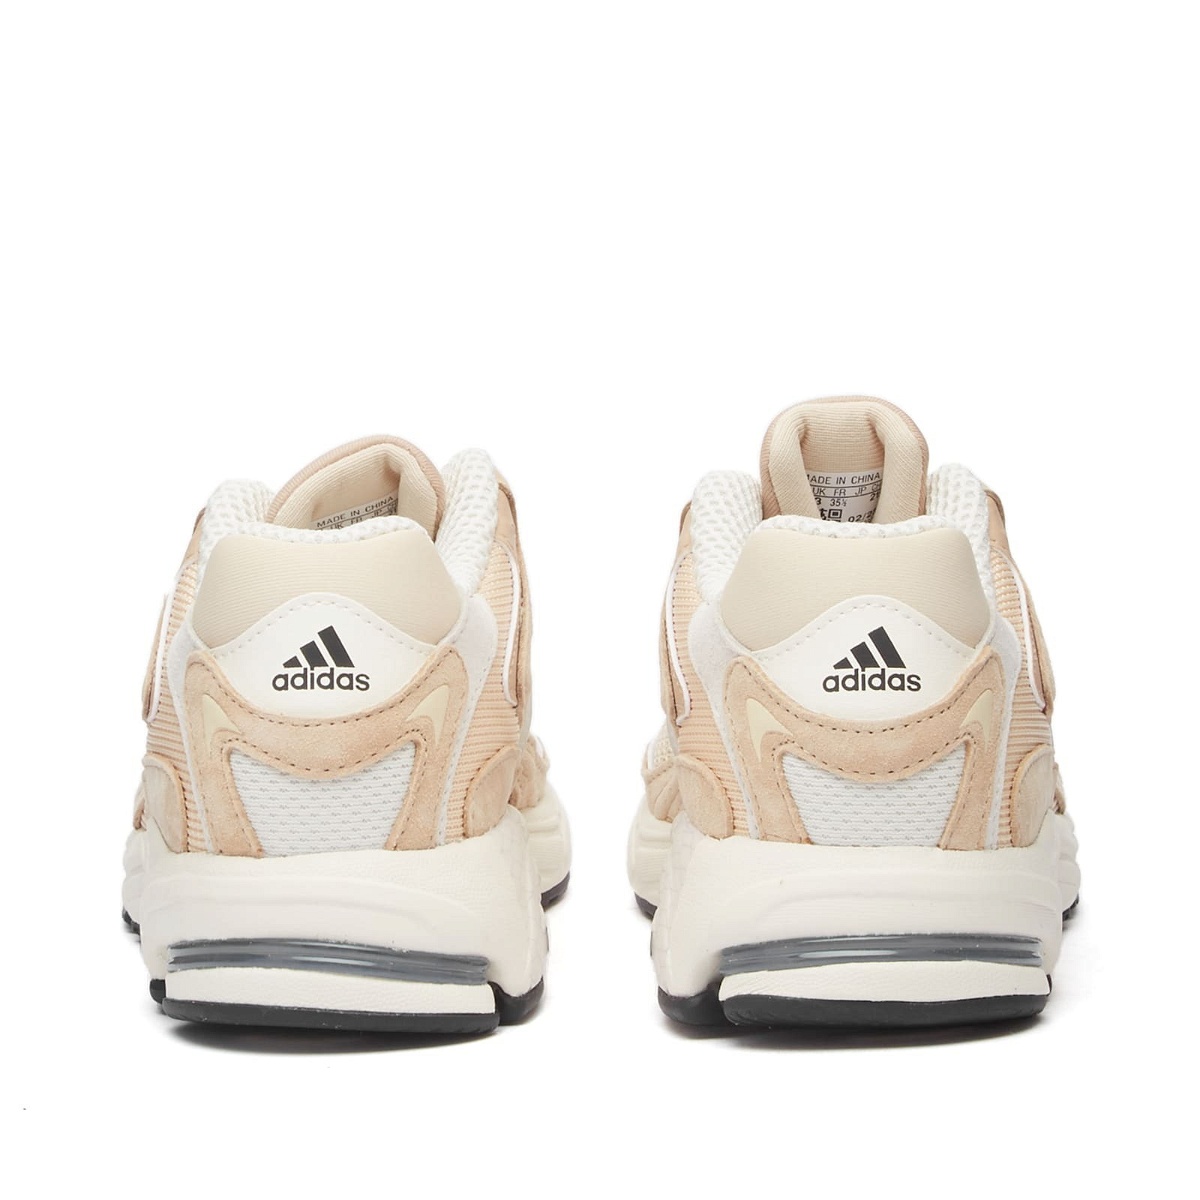 Adidas Response CL Sneakers in adidas White/Beige Sand/Off